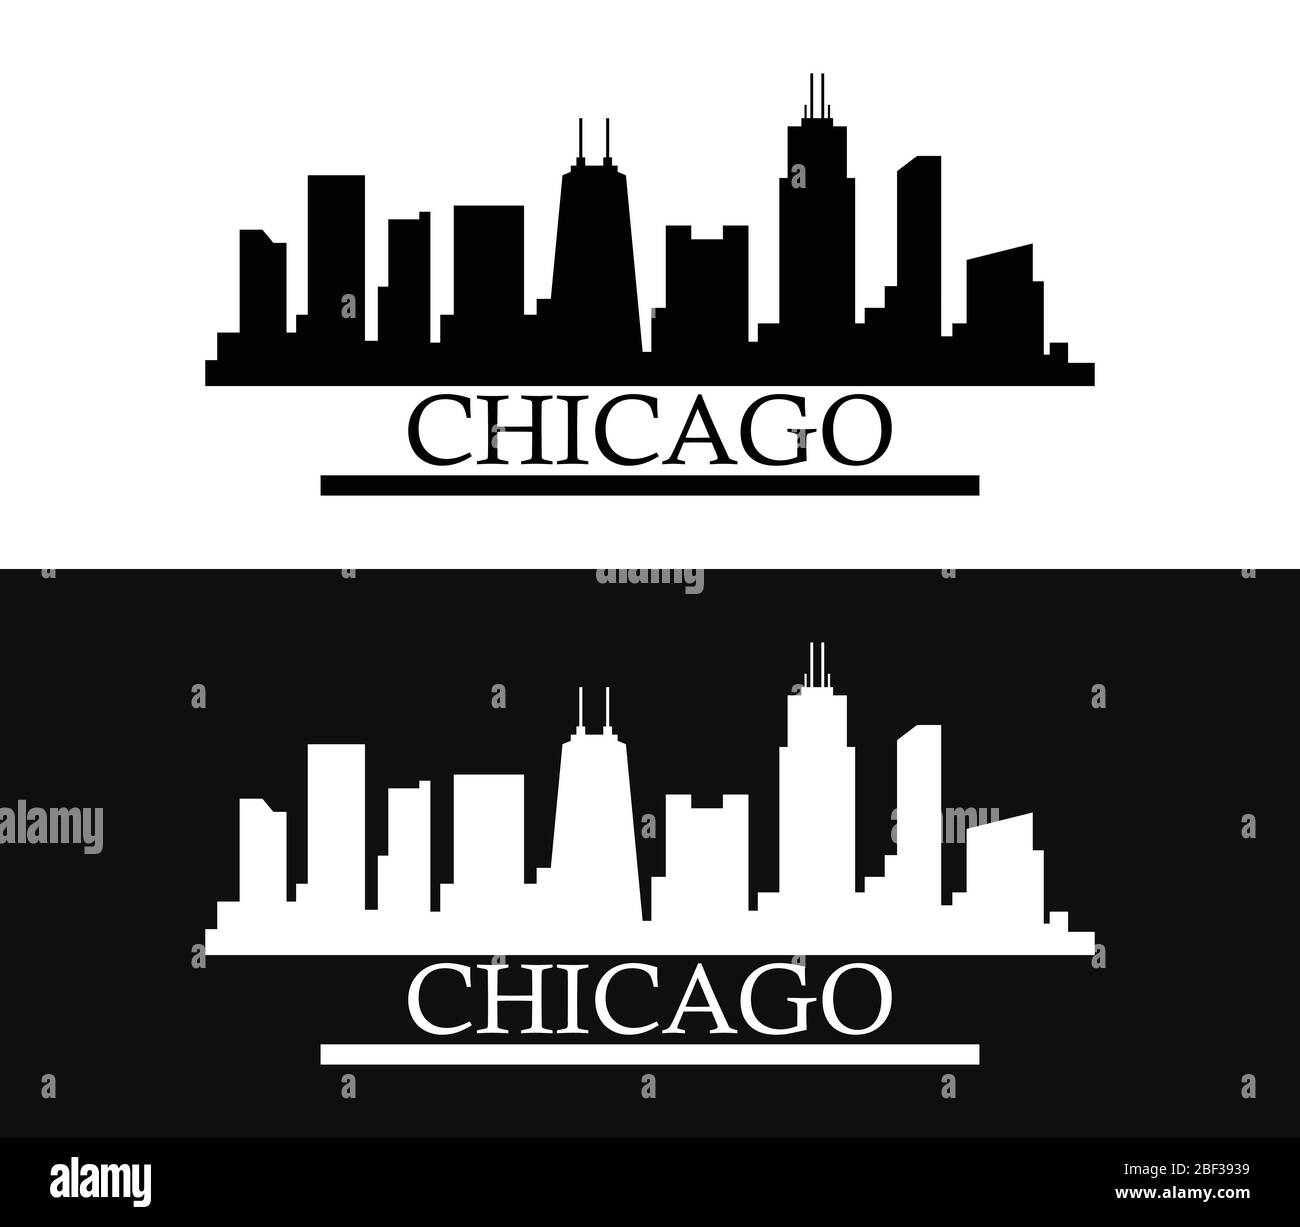 Chicago icon illustrated in vector on white background Stock Vector